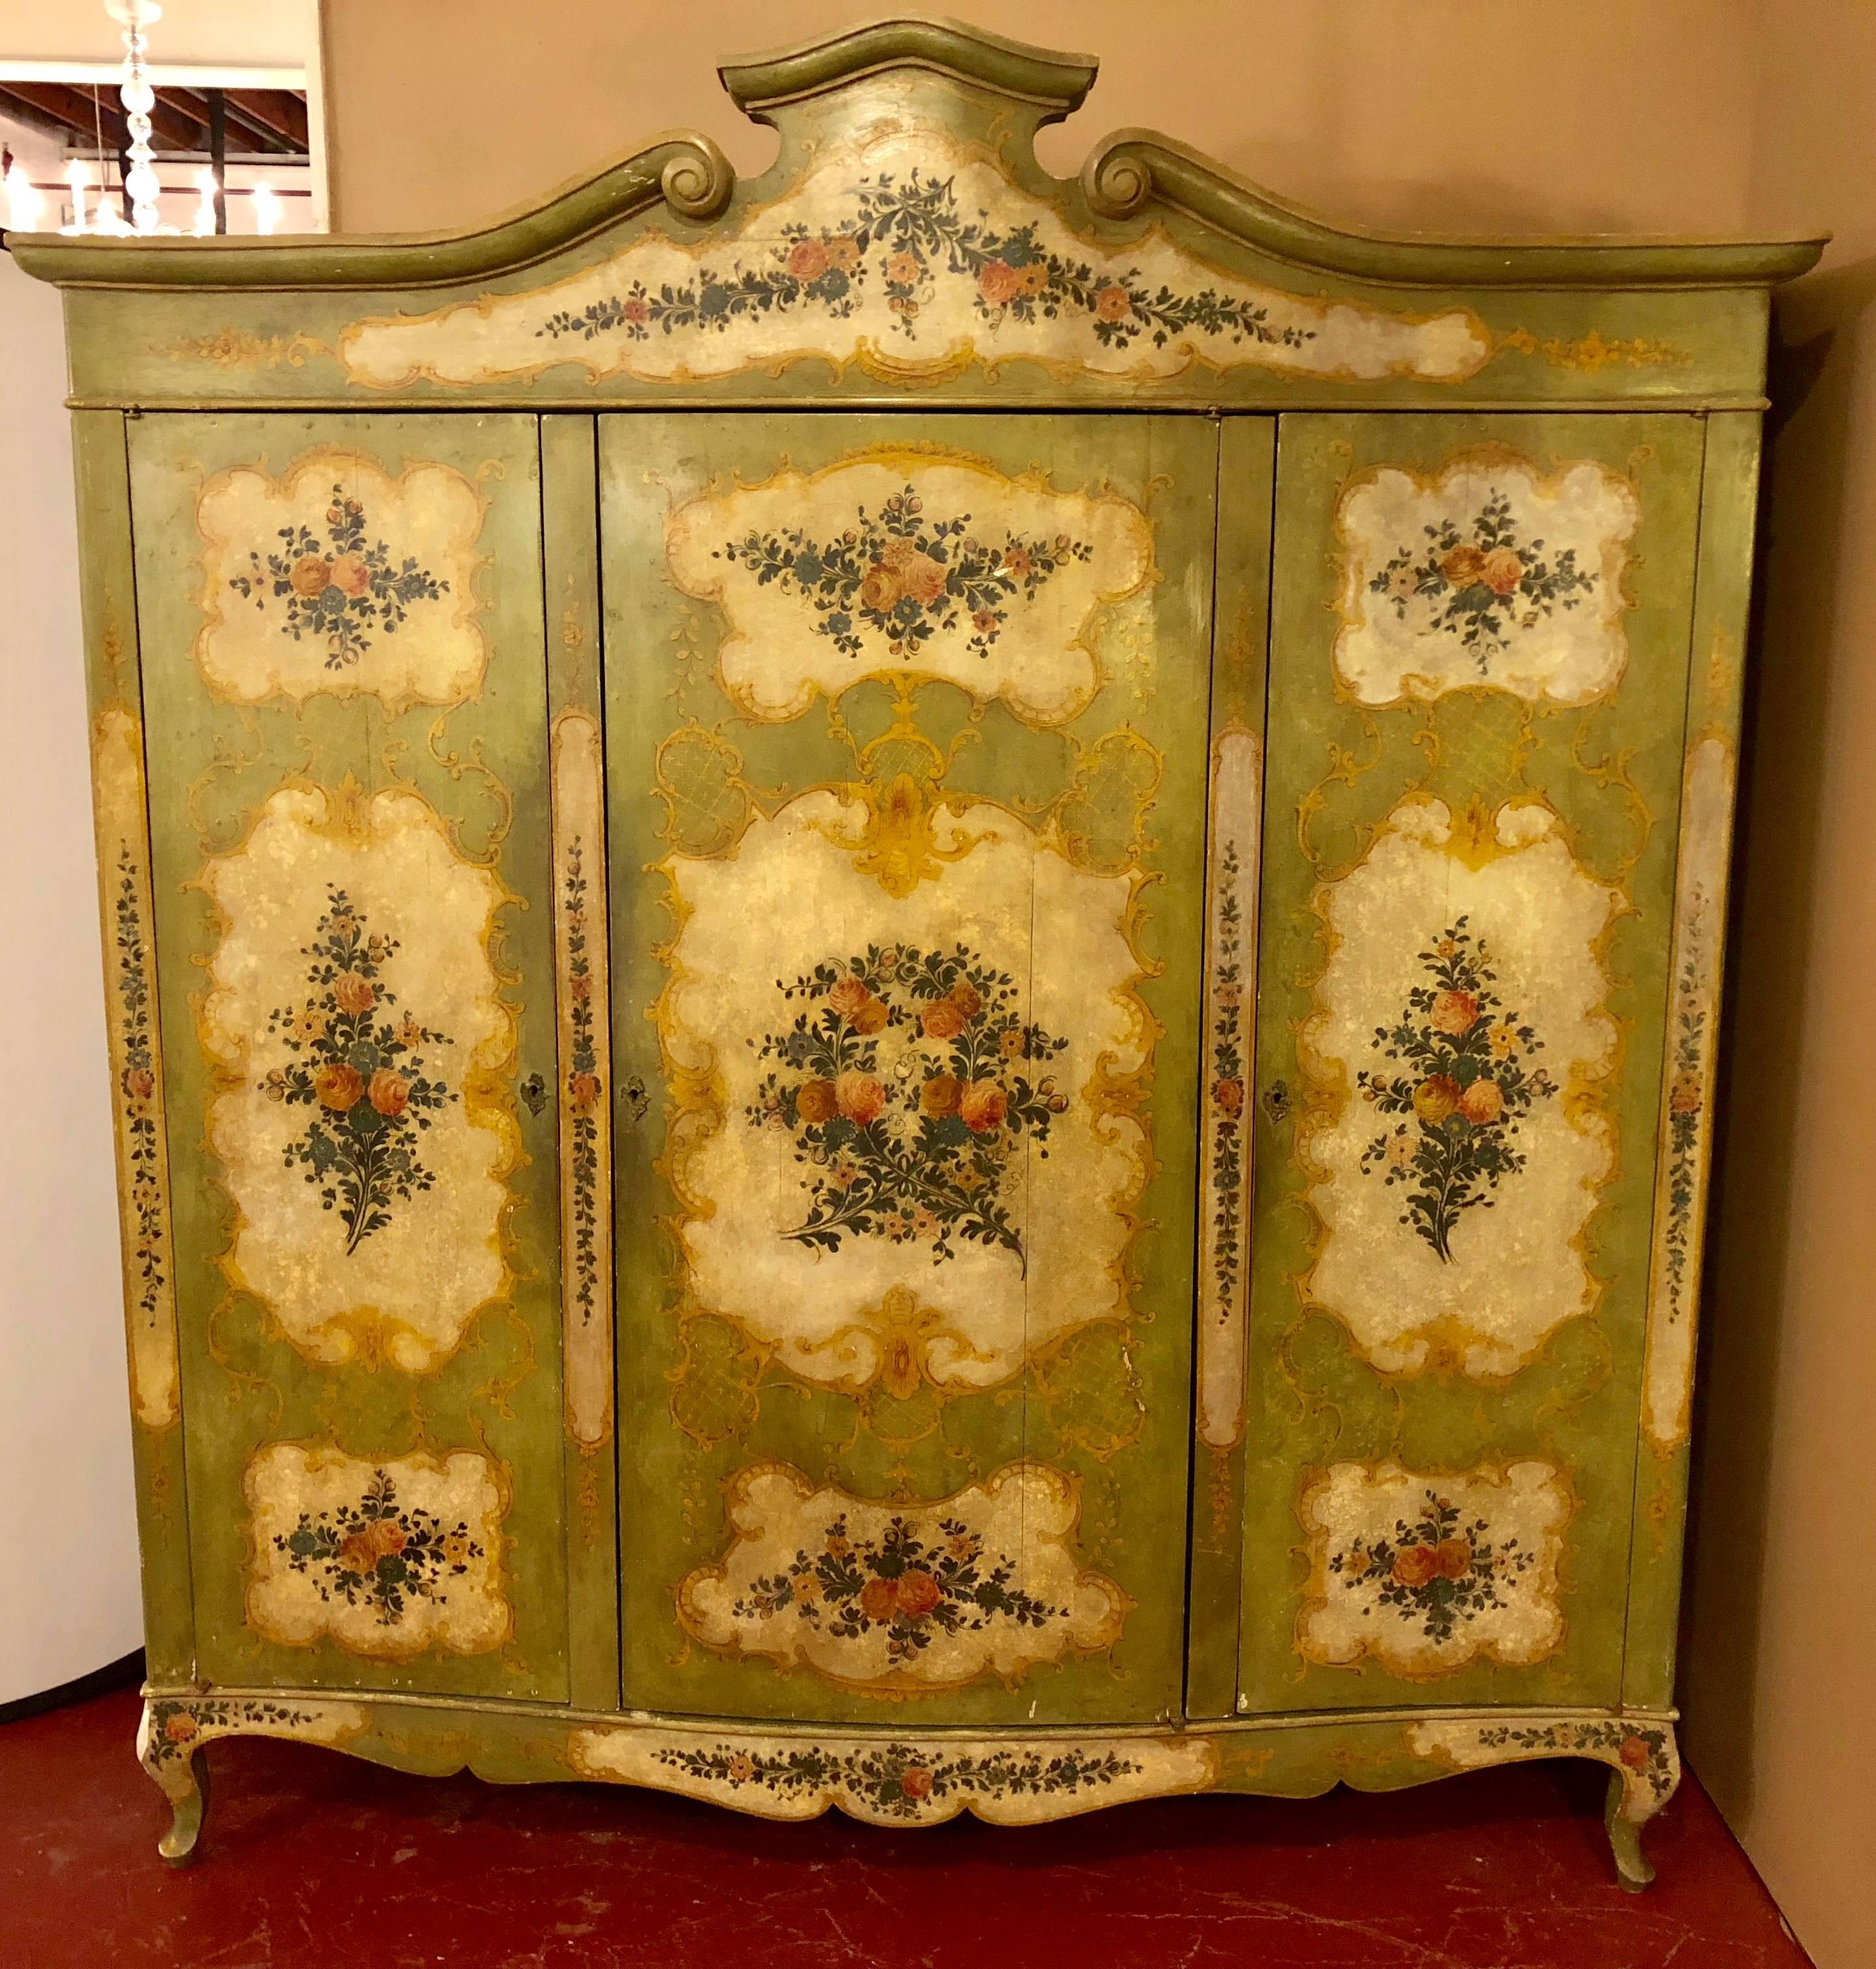 An Italian Continental floral painted wardrobe or armoire chest cabinet. This large three-drawer cabinet is finely hand paint decorated with design of flowers and leafs with vines. The side painted to match the front.